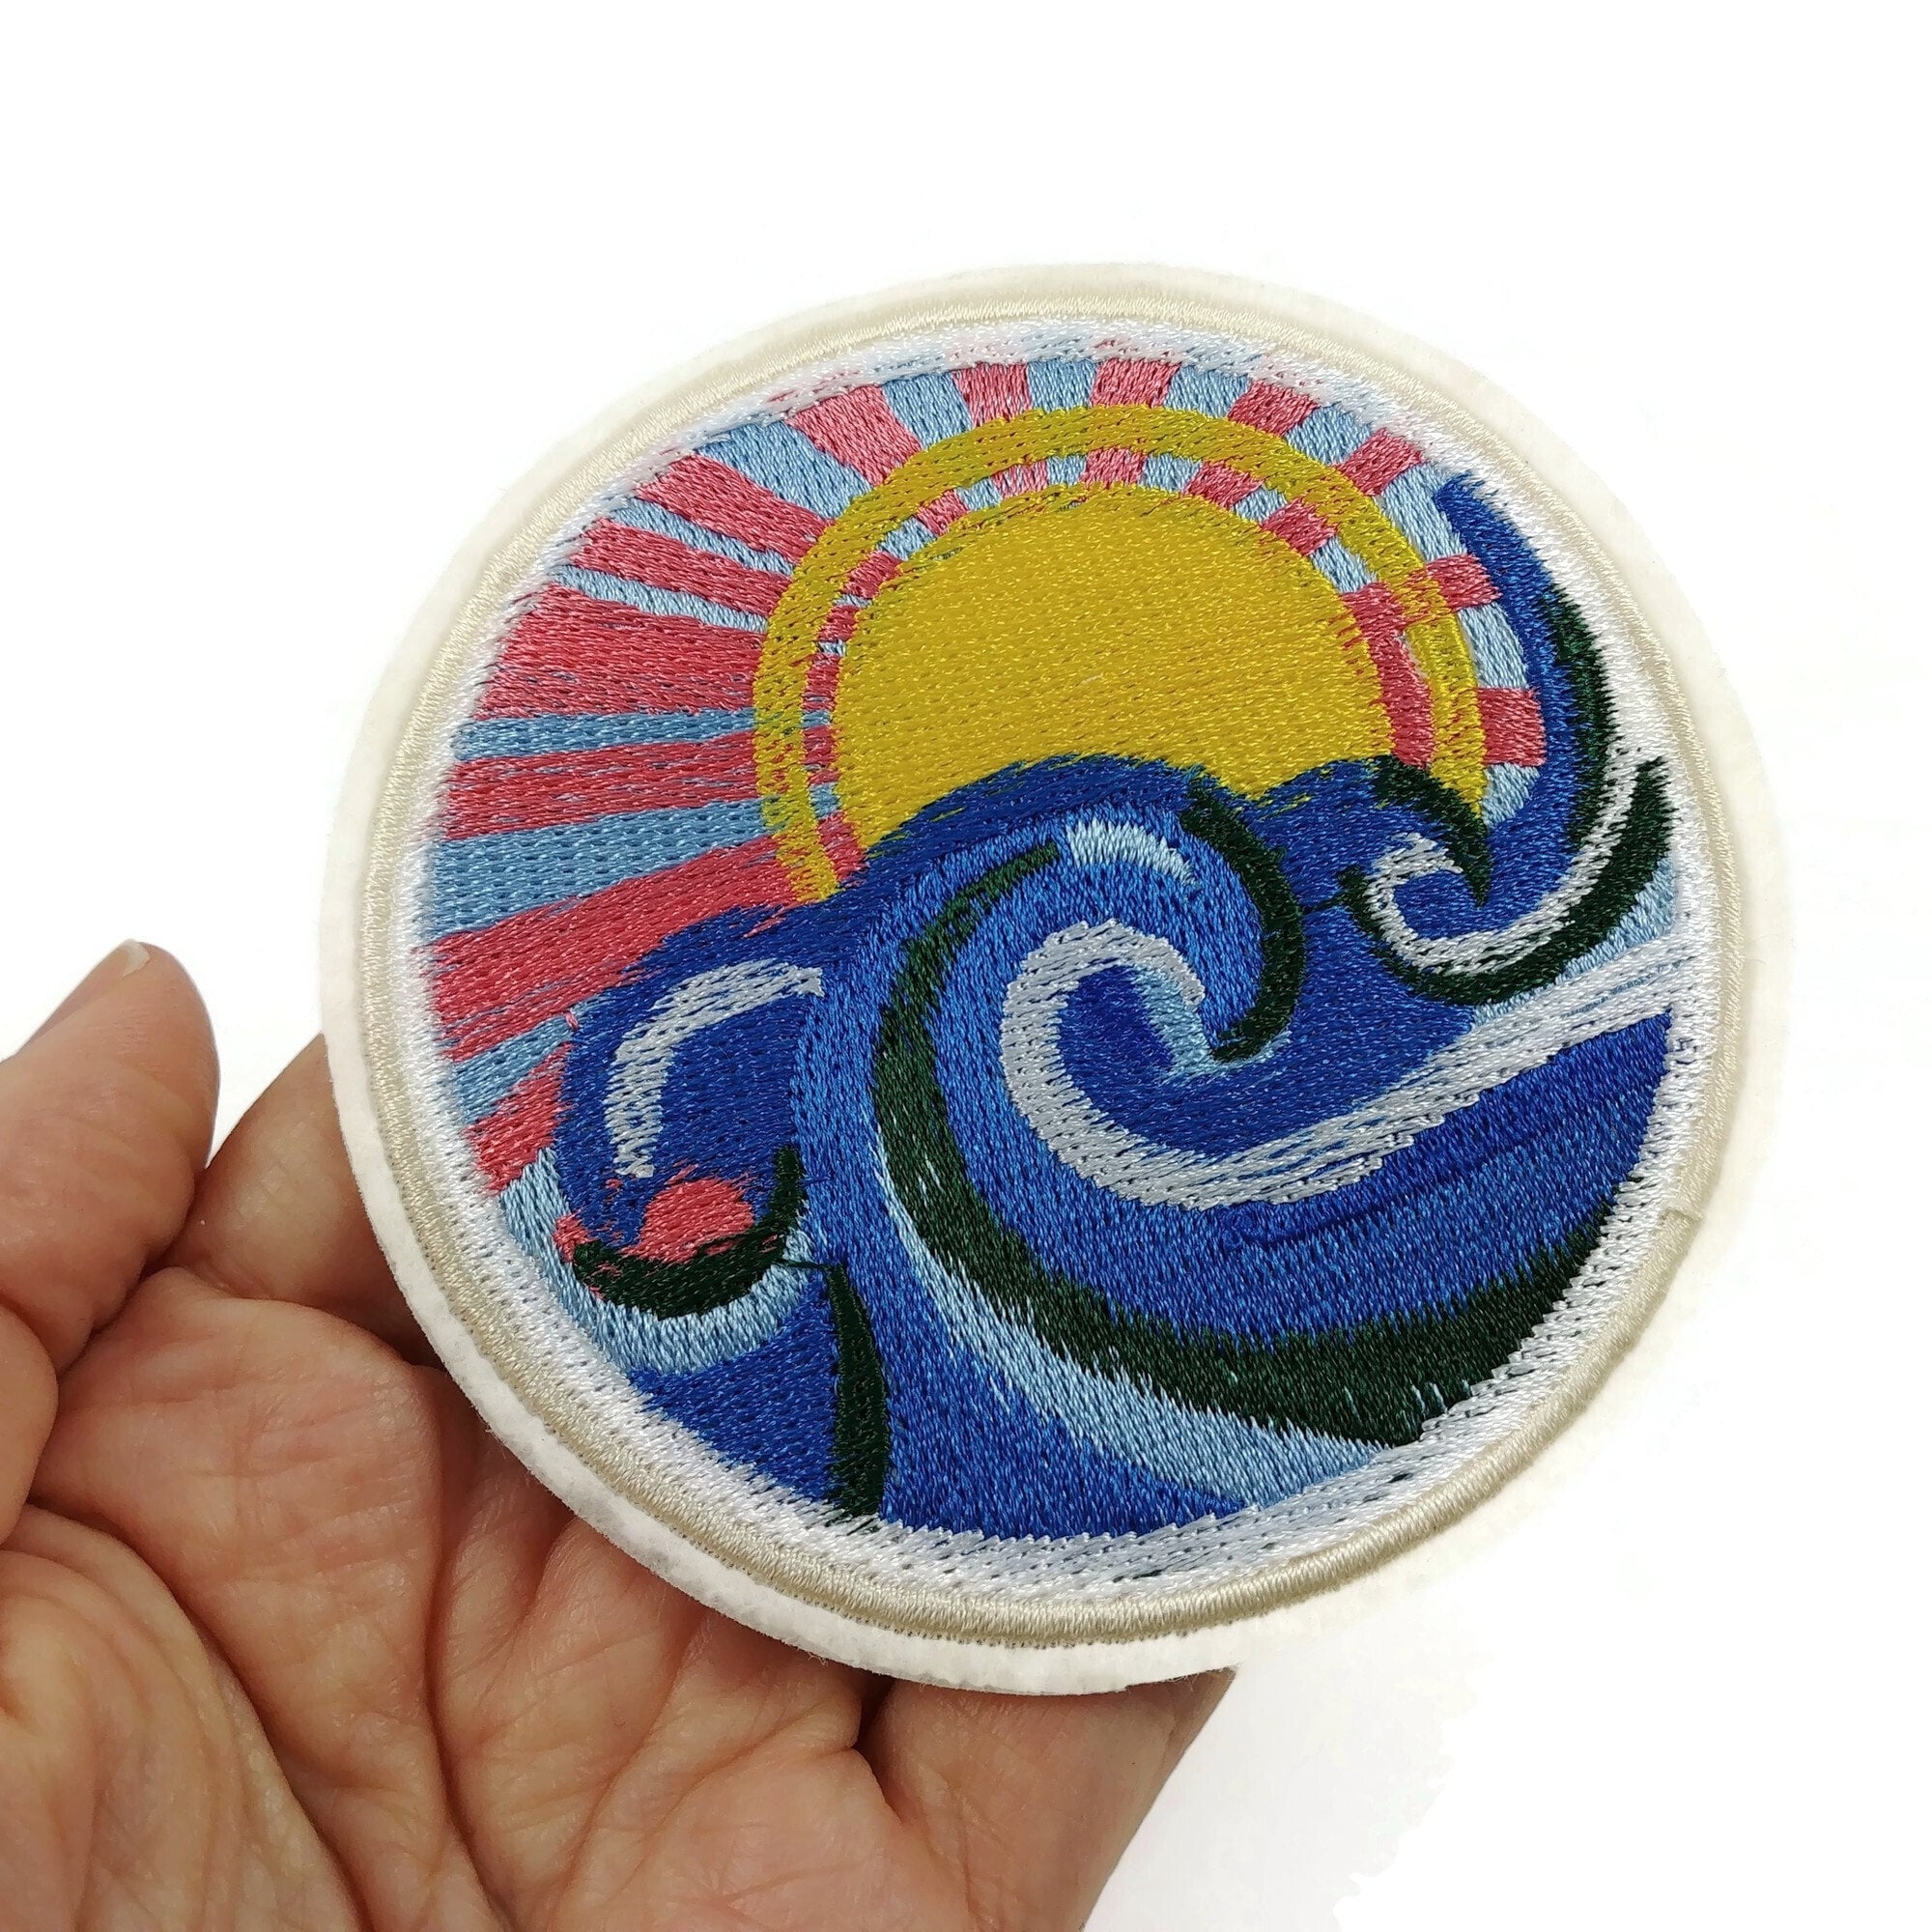 Surf iron on patch, Embroidered sew on patch, Summer badge applique